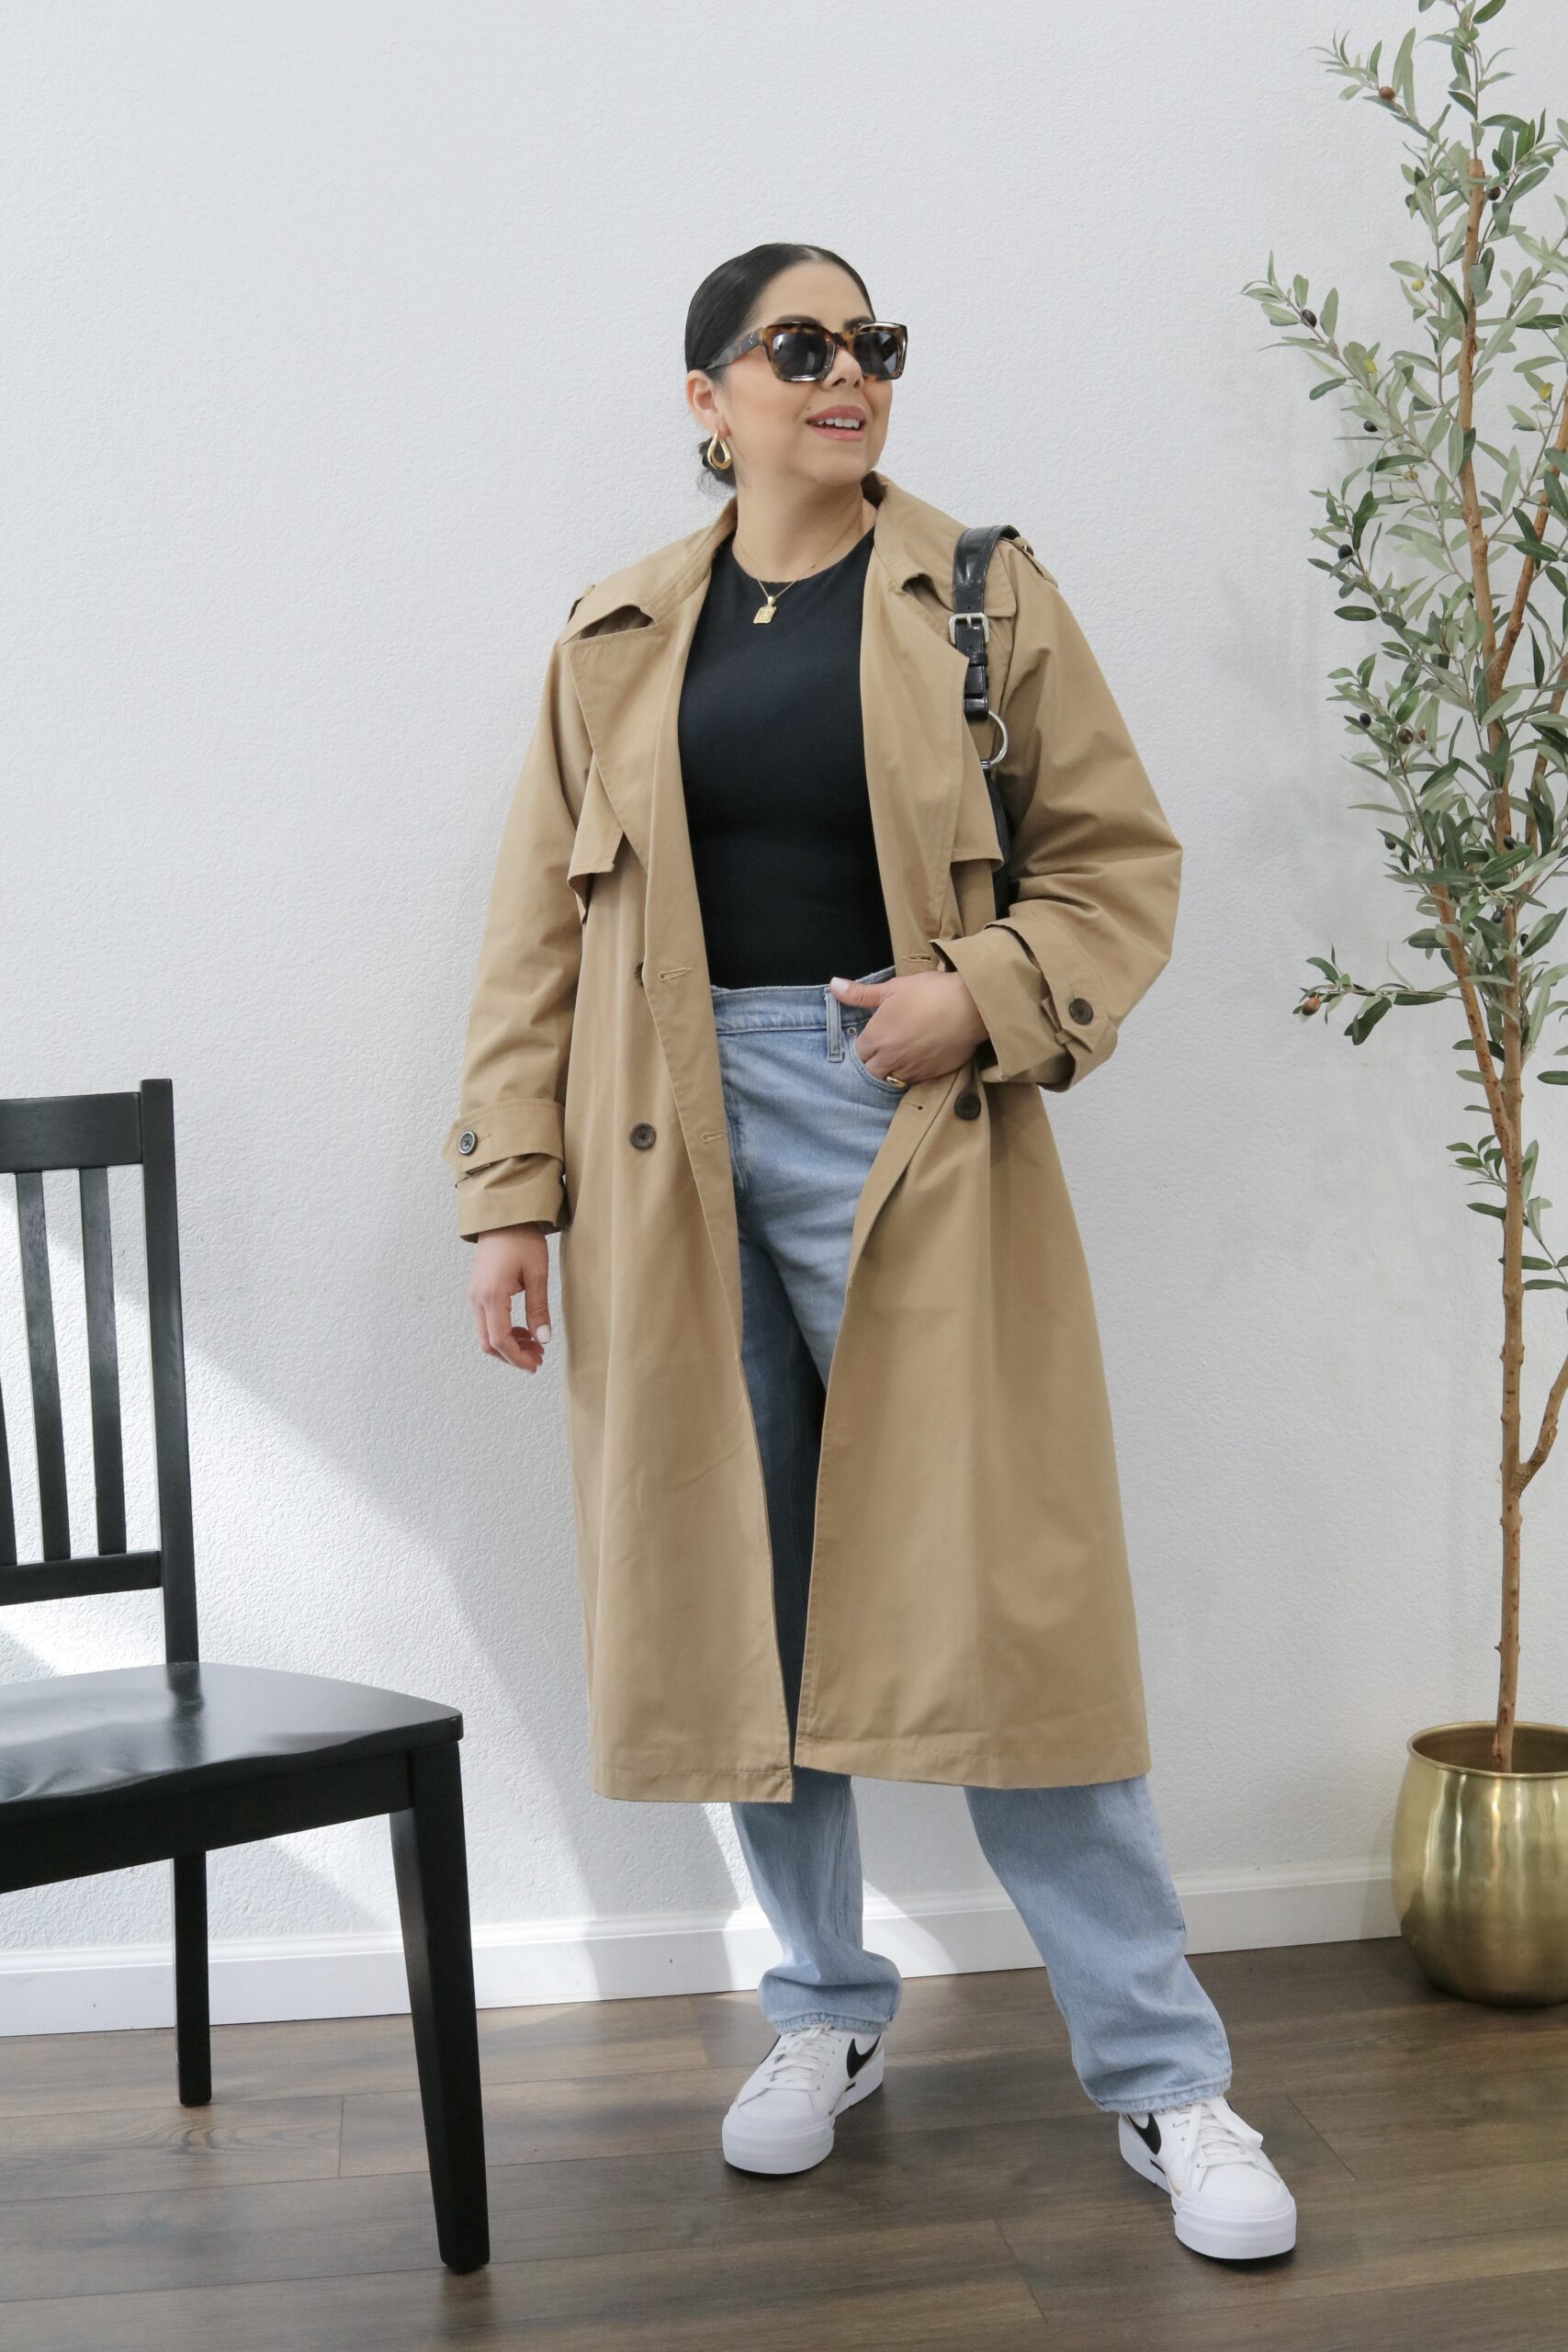 Abercrombie favorites, Abercrombie waterproof trench coat, how to style nike lift sneakers